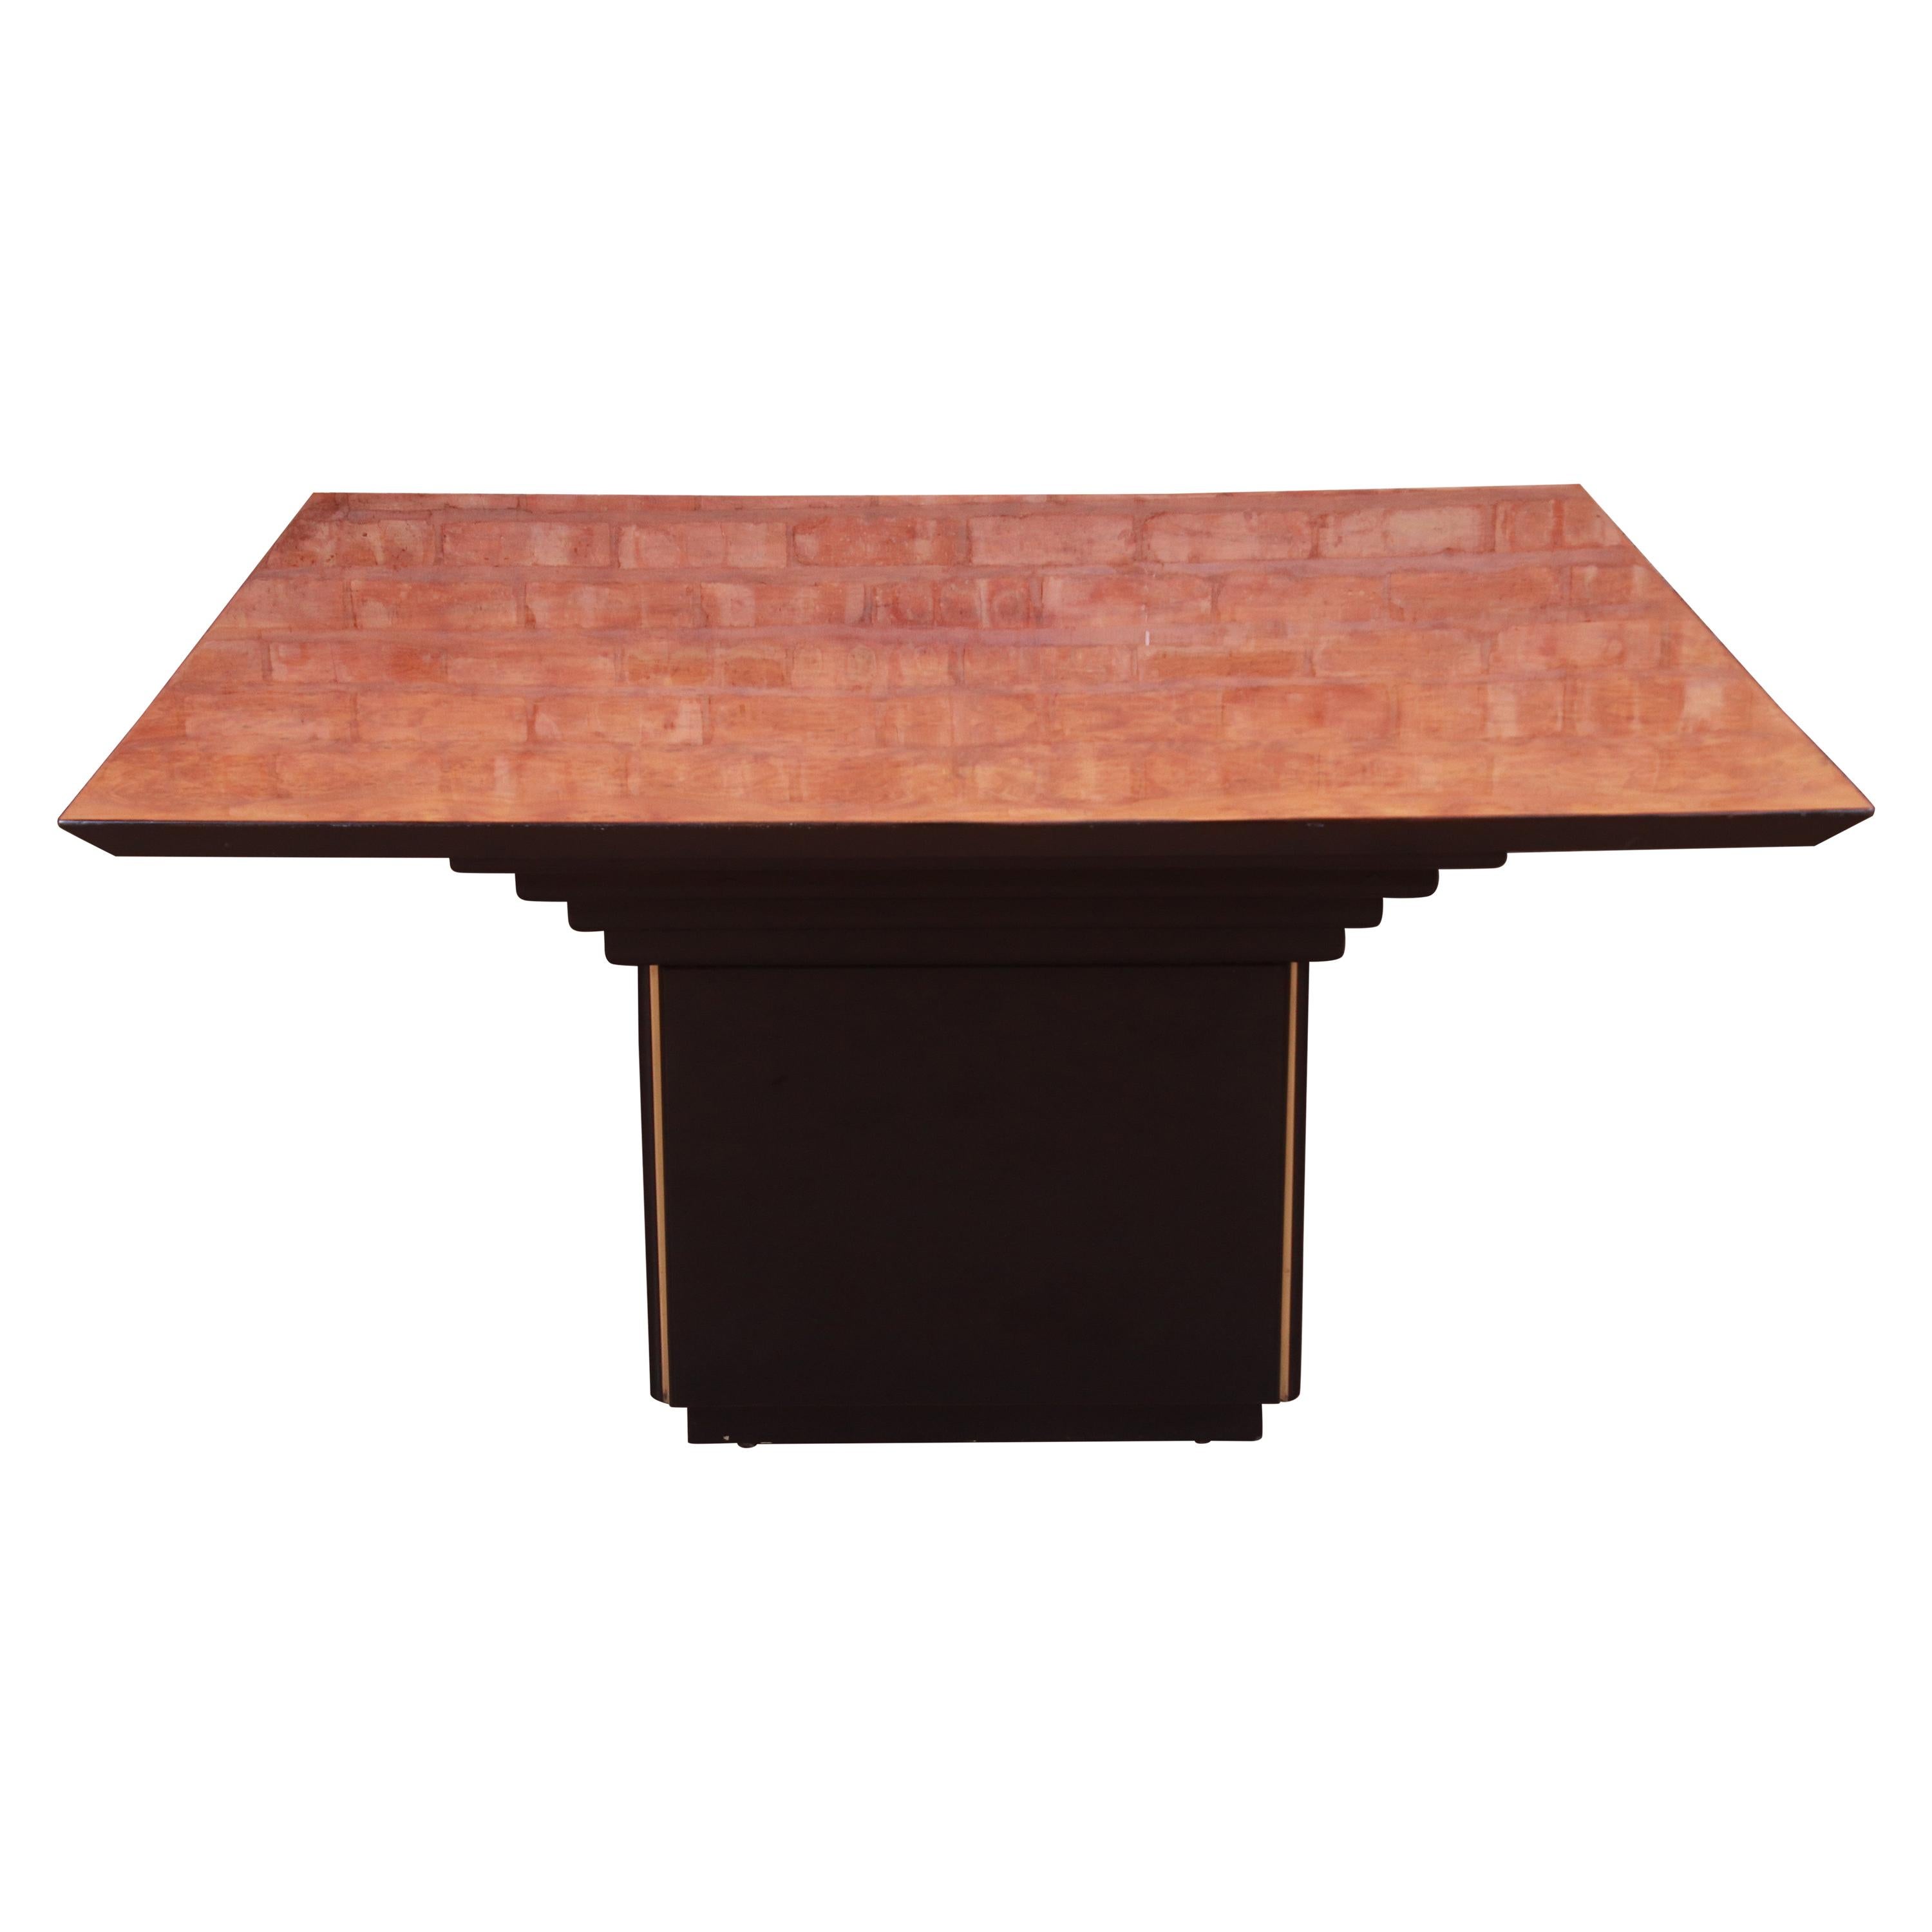 Roche Bobois Modern Art Deco Burl Wood and Black Lacquer Dining Table